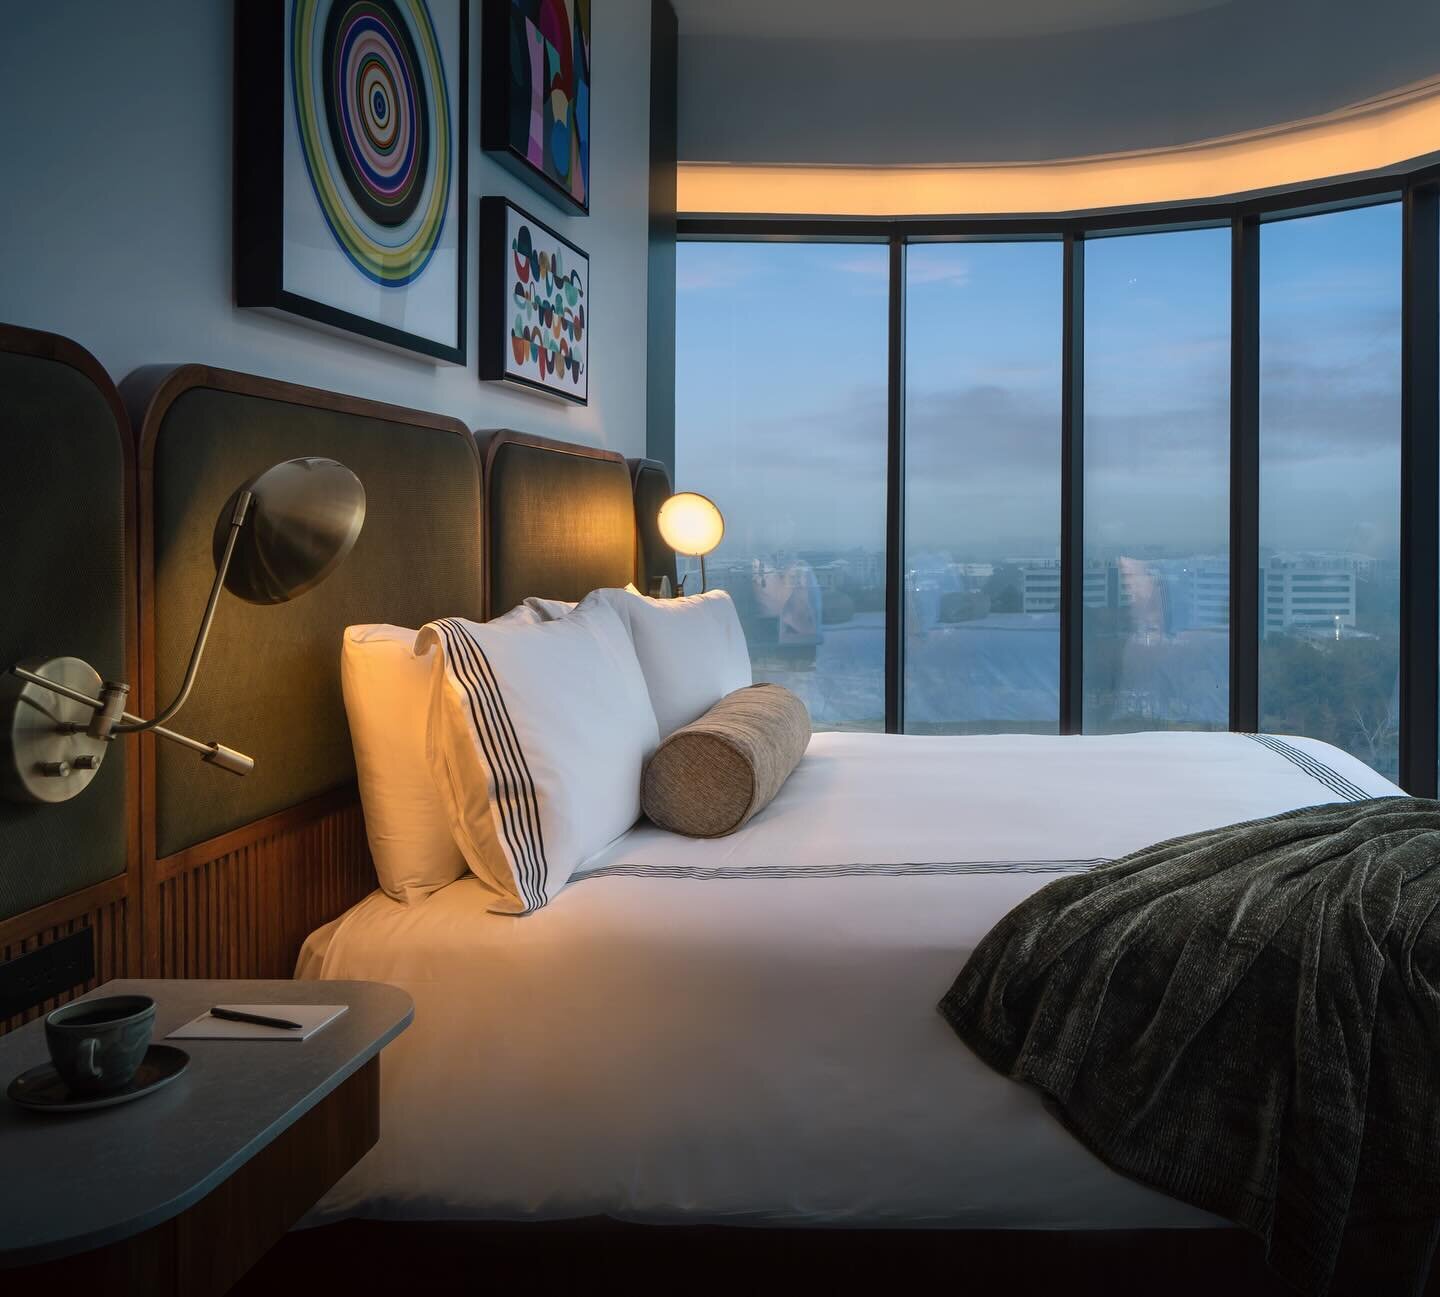 Introducing Houston&rsquo;s newest gem overlooking Buffalo Bayou Park!

The hotel&rsquo;s 172 guest rooms, including 34 suites, embody the spirit of old Texas, with a contemporary twist.

@thompsonhoustonhotel tailors to all guests with an entire flo